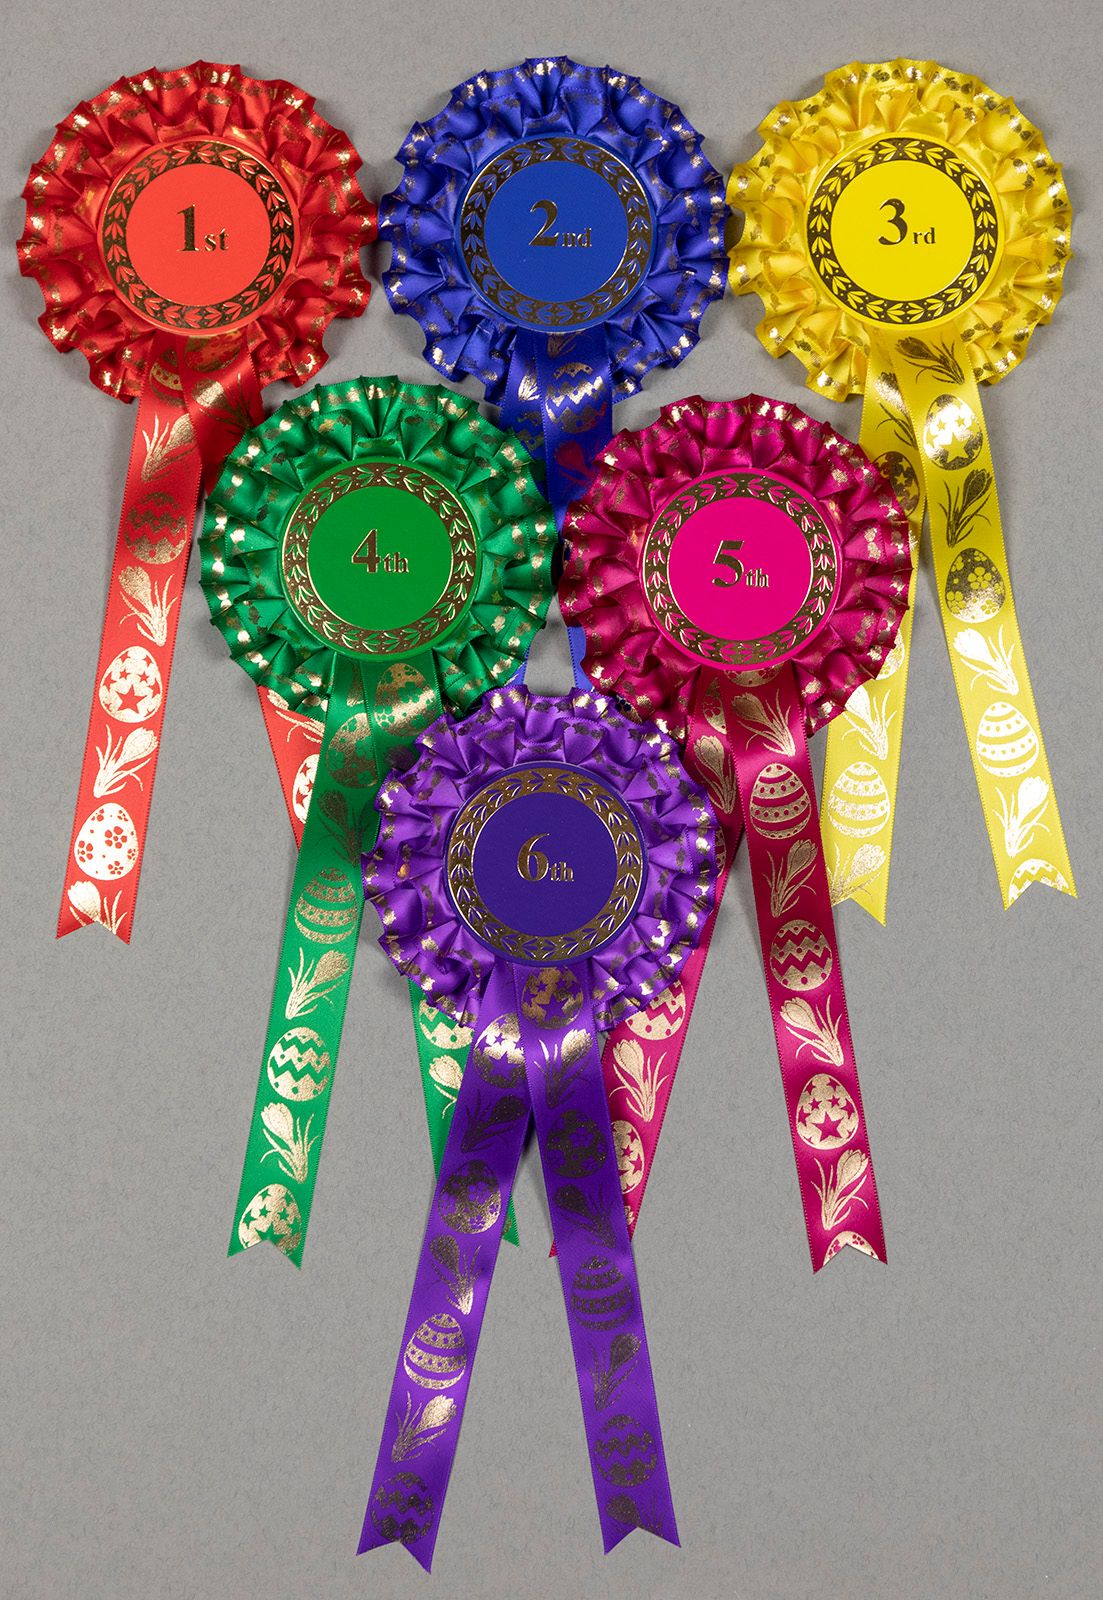 Easter Rosettes, 2-tier, Set x 1st-3rd, 1st-4th or 1st-6th